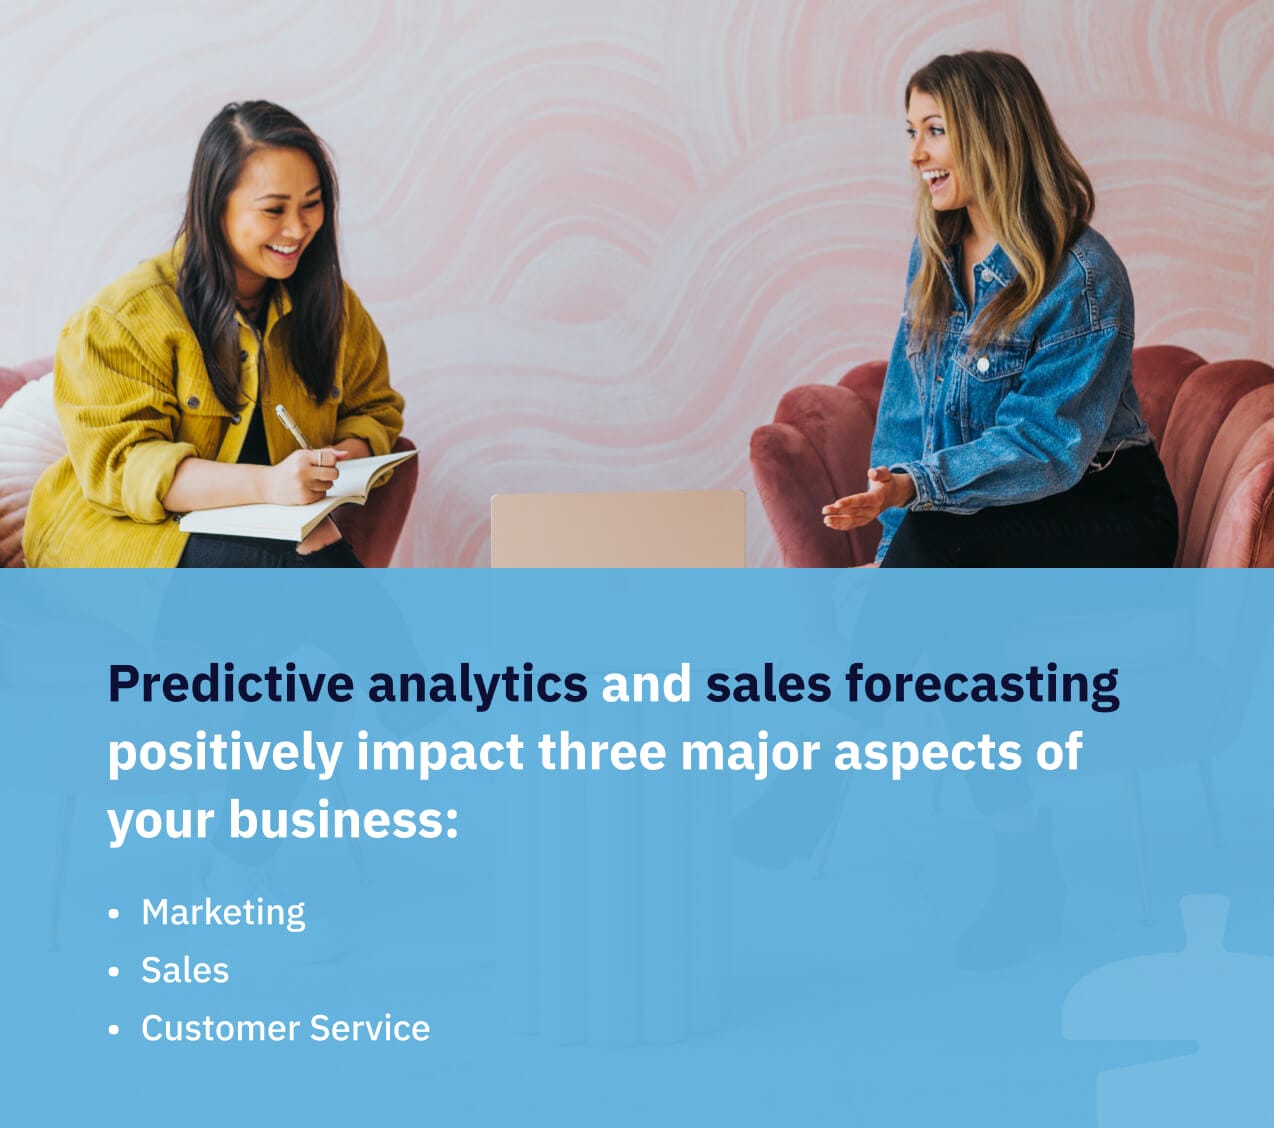 Predictive analytics can help you make informed decisions related to marketing, sales, and customer service